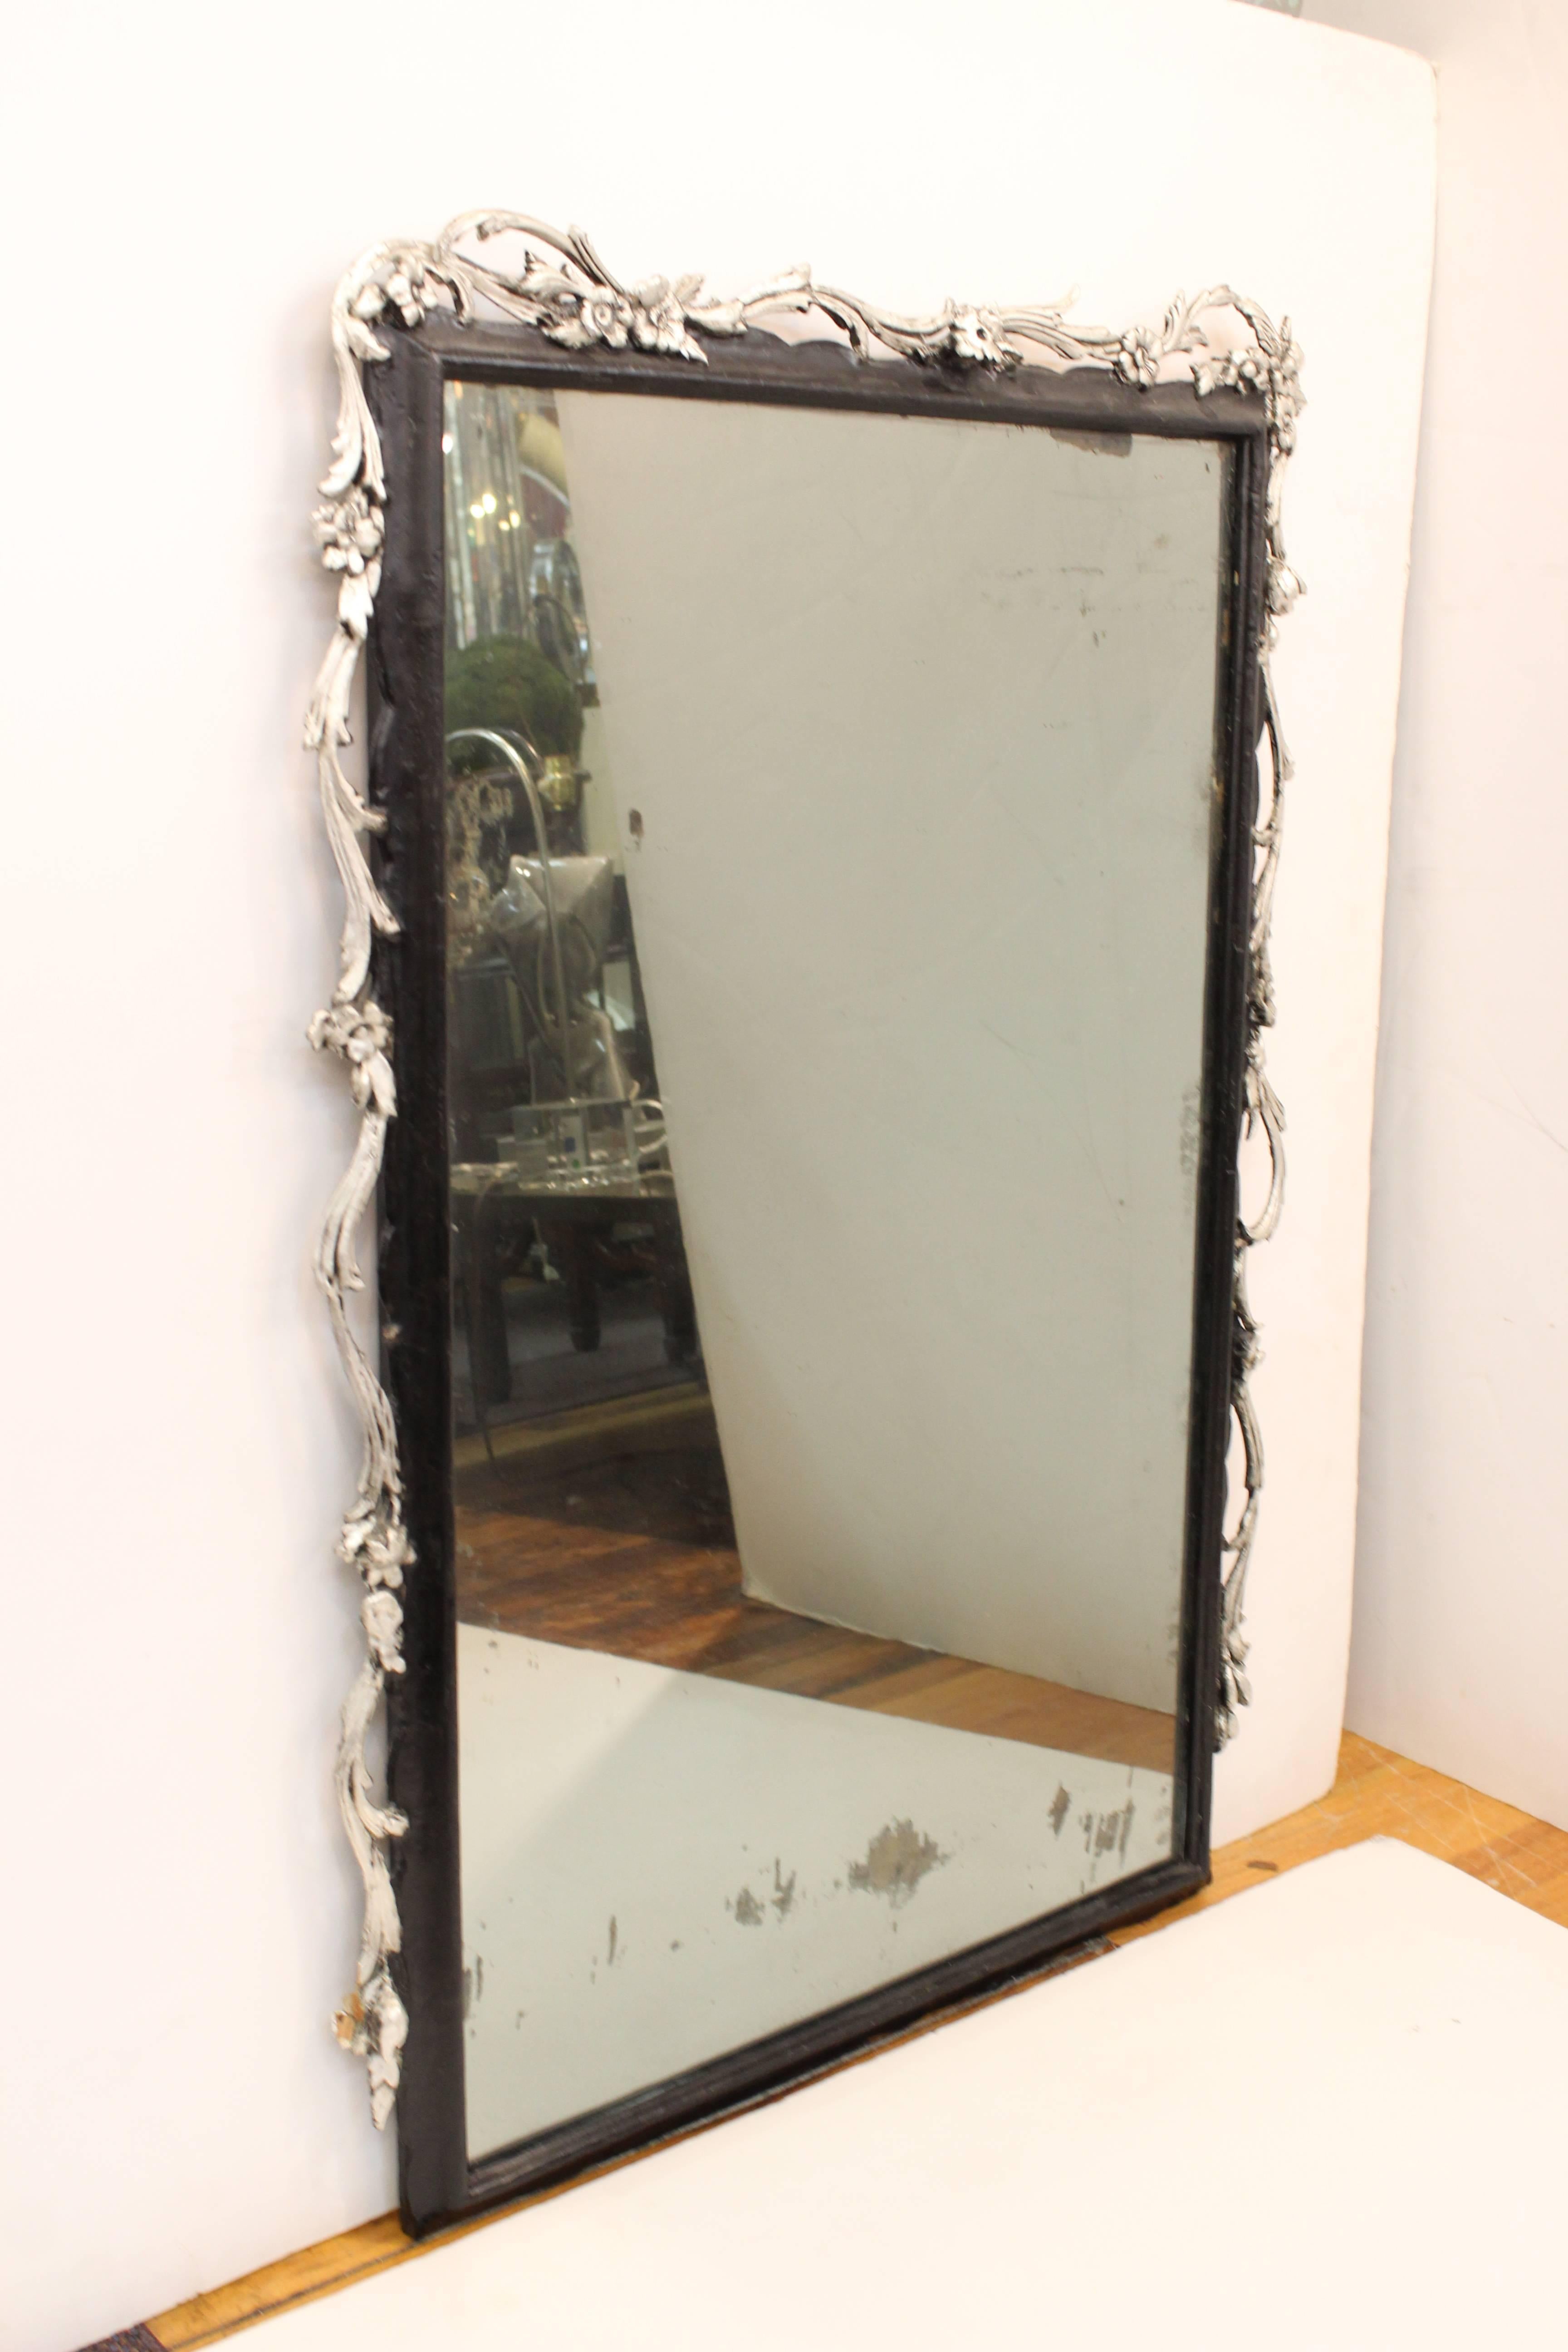 A rectangular wall mirror in a black painted frame. The crown and sides of the frame are accented with silver-tone painted vines and flowers. Some visible spotting to the mirror and minor wear to the frame. The piece is in good condition.